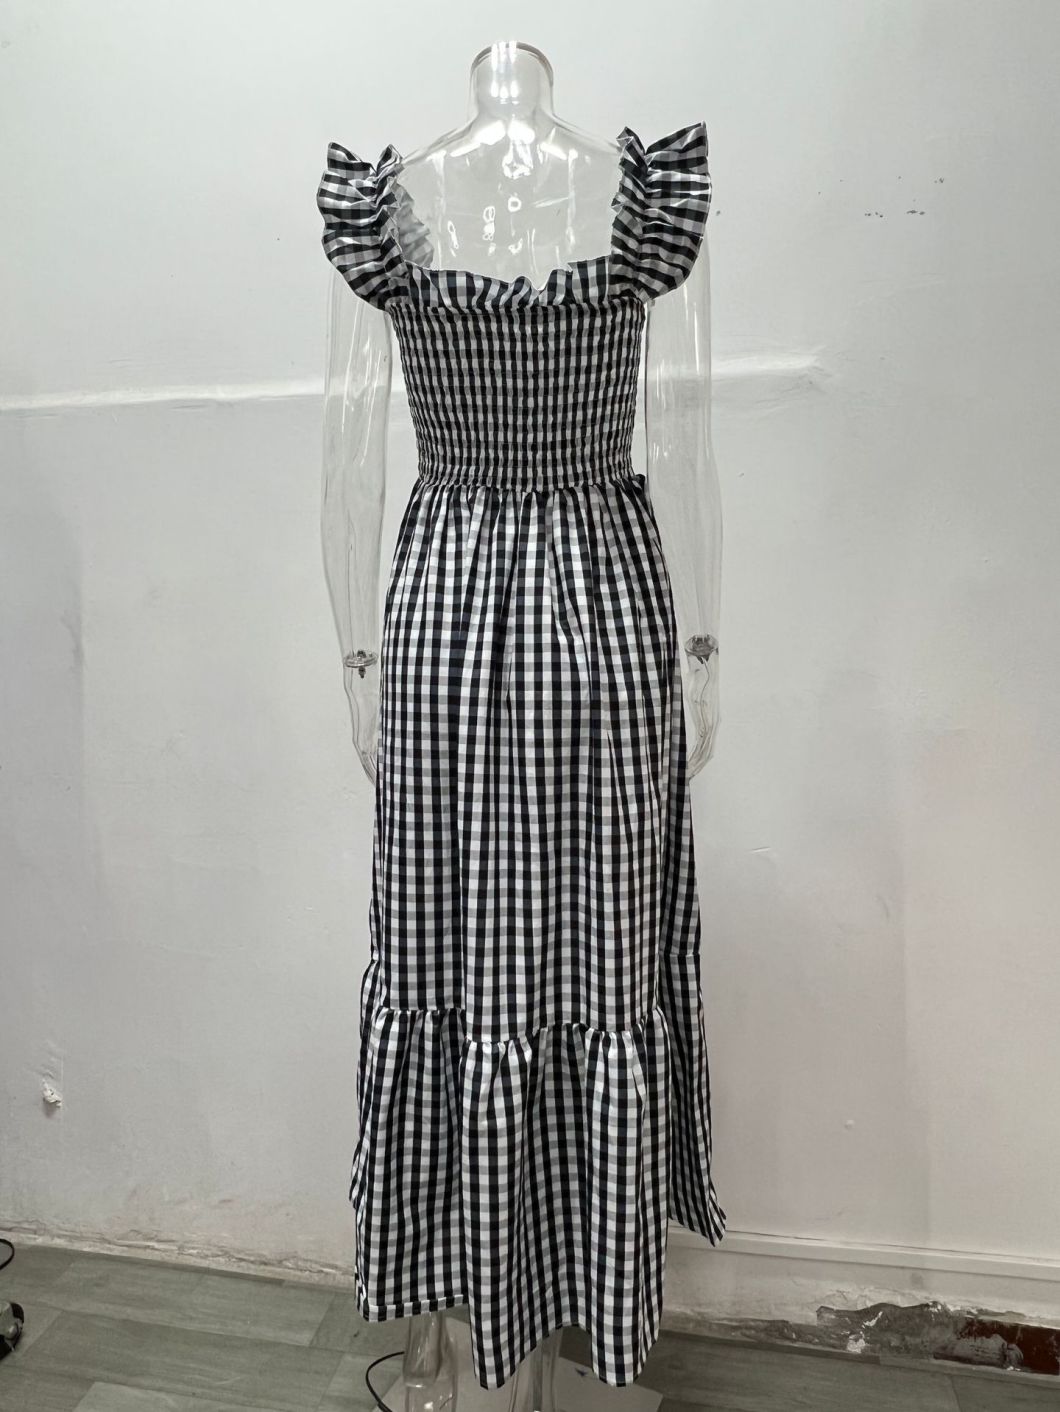 2023 Europe and The United States New Summer Women&prime;s Collage Plaid Strap Casual Swing Dress Women